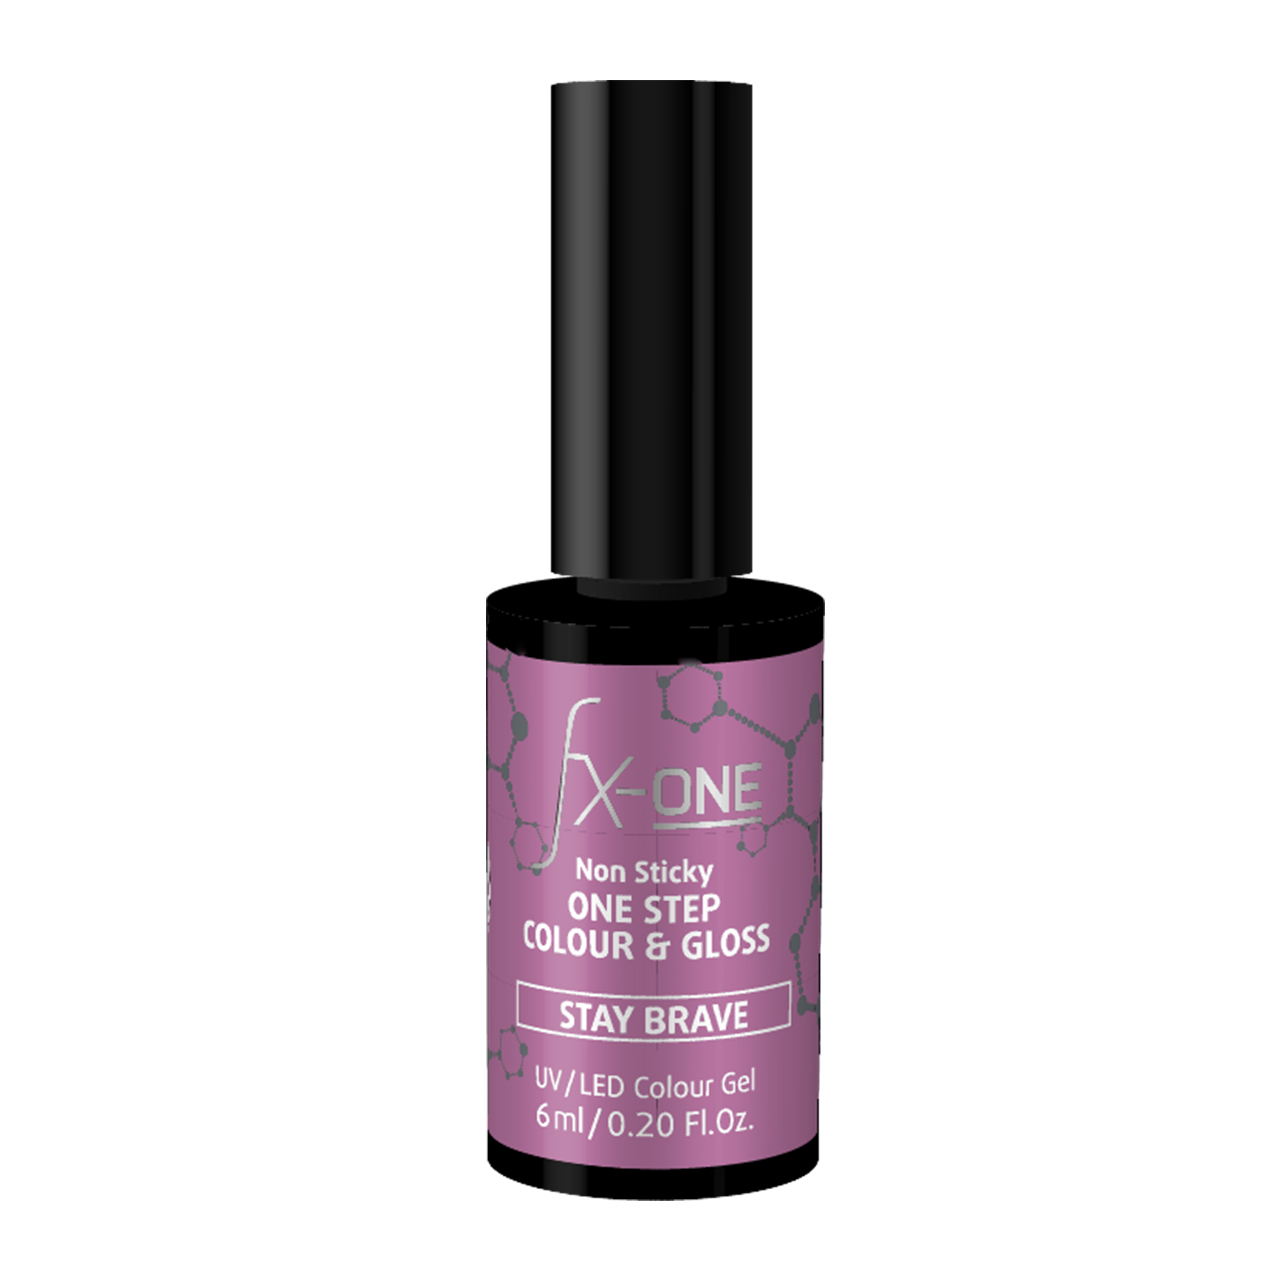 FX-ONE Colour & Gloss Stay Brave